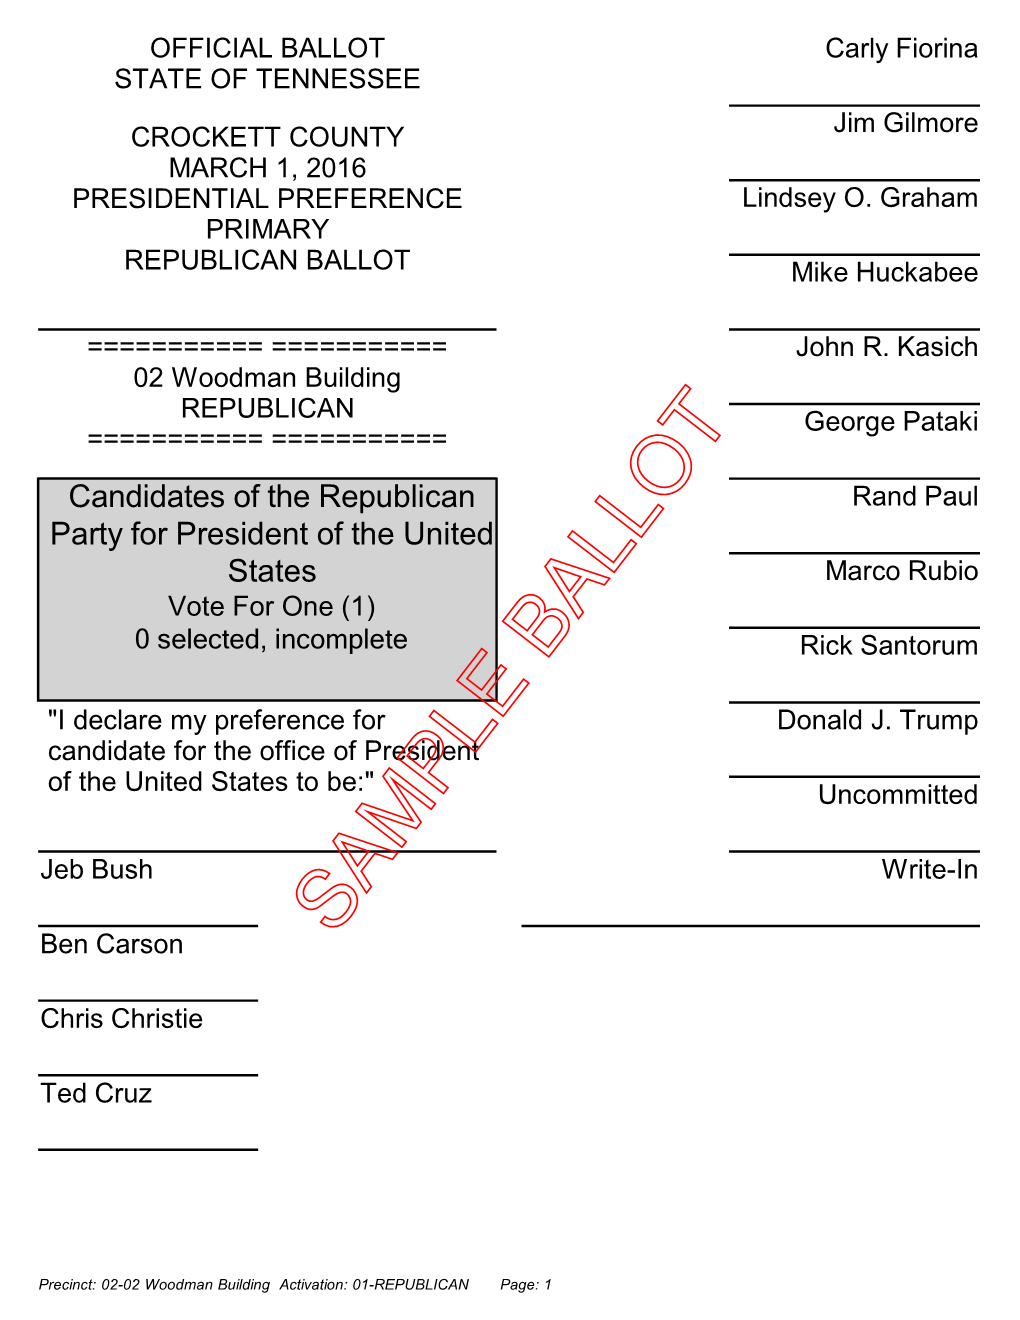 Candidates of the Republican Party for President of the United States